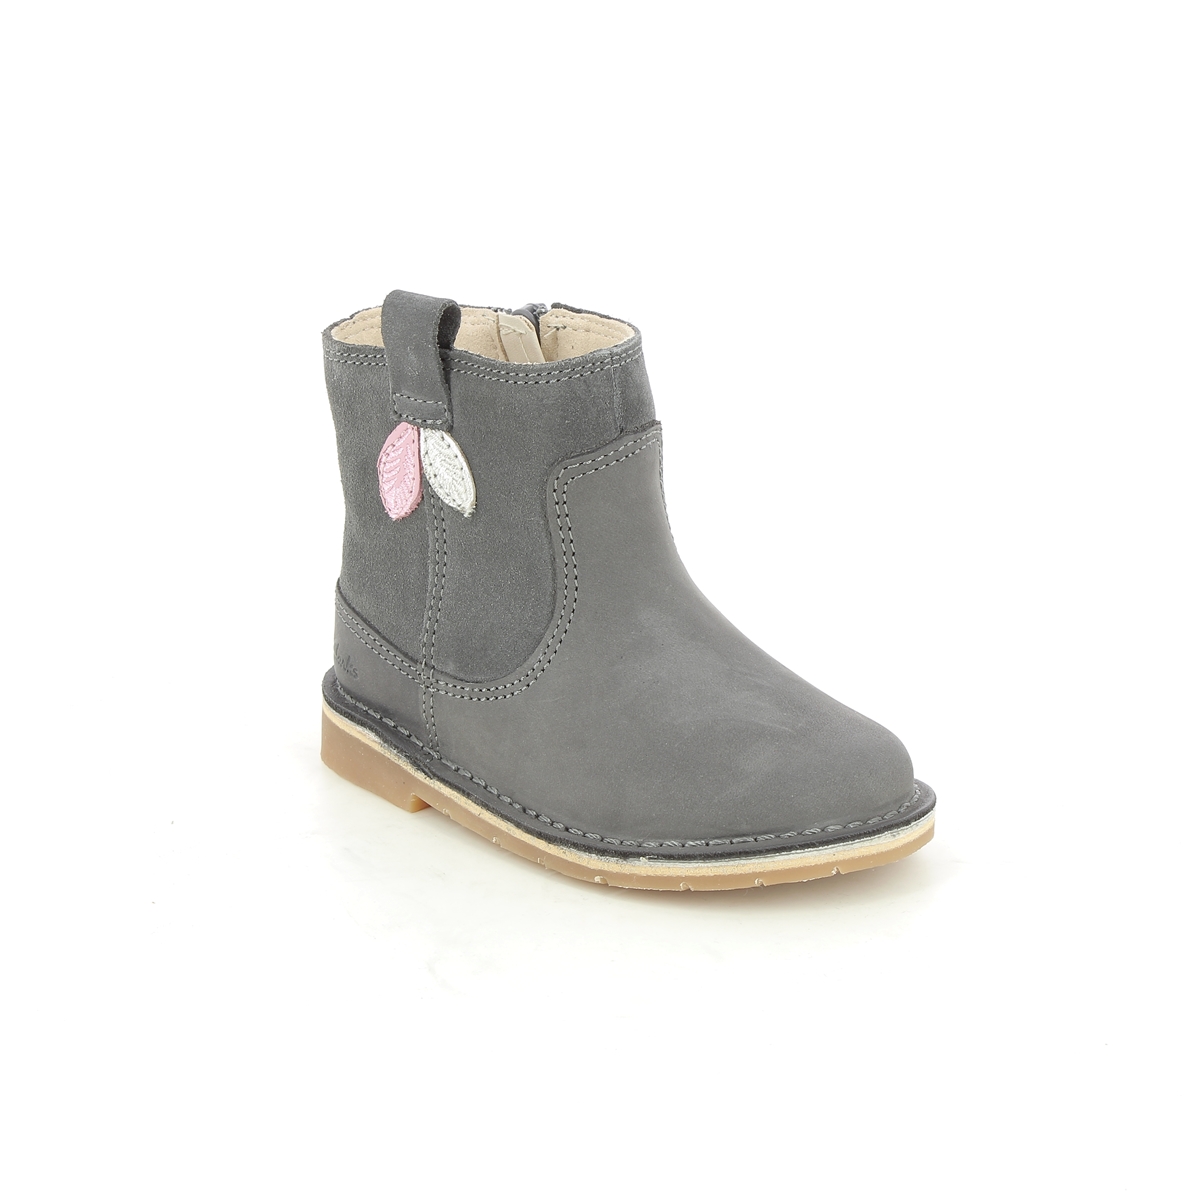 Clarks Comet Style T Grey Leather Kids Toddler Girls Boots 619426F In Size 7 In Plain Grey Leather F Width Fitting Regular Fit For kids